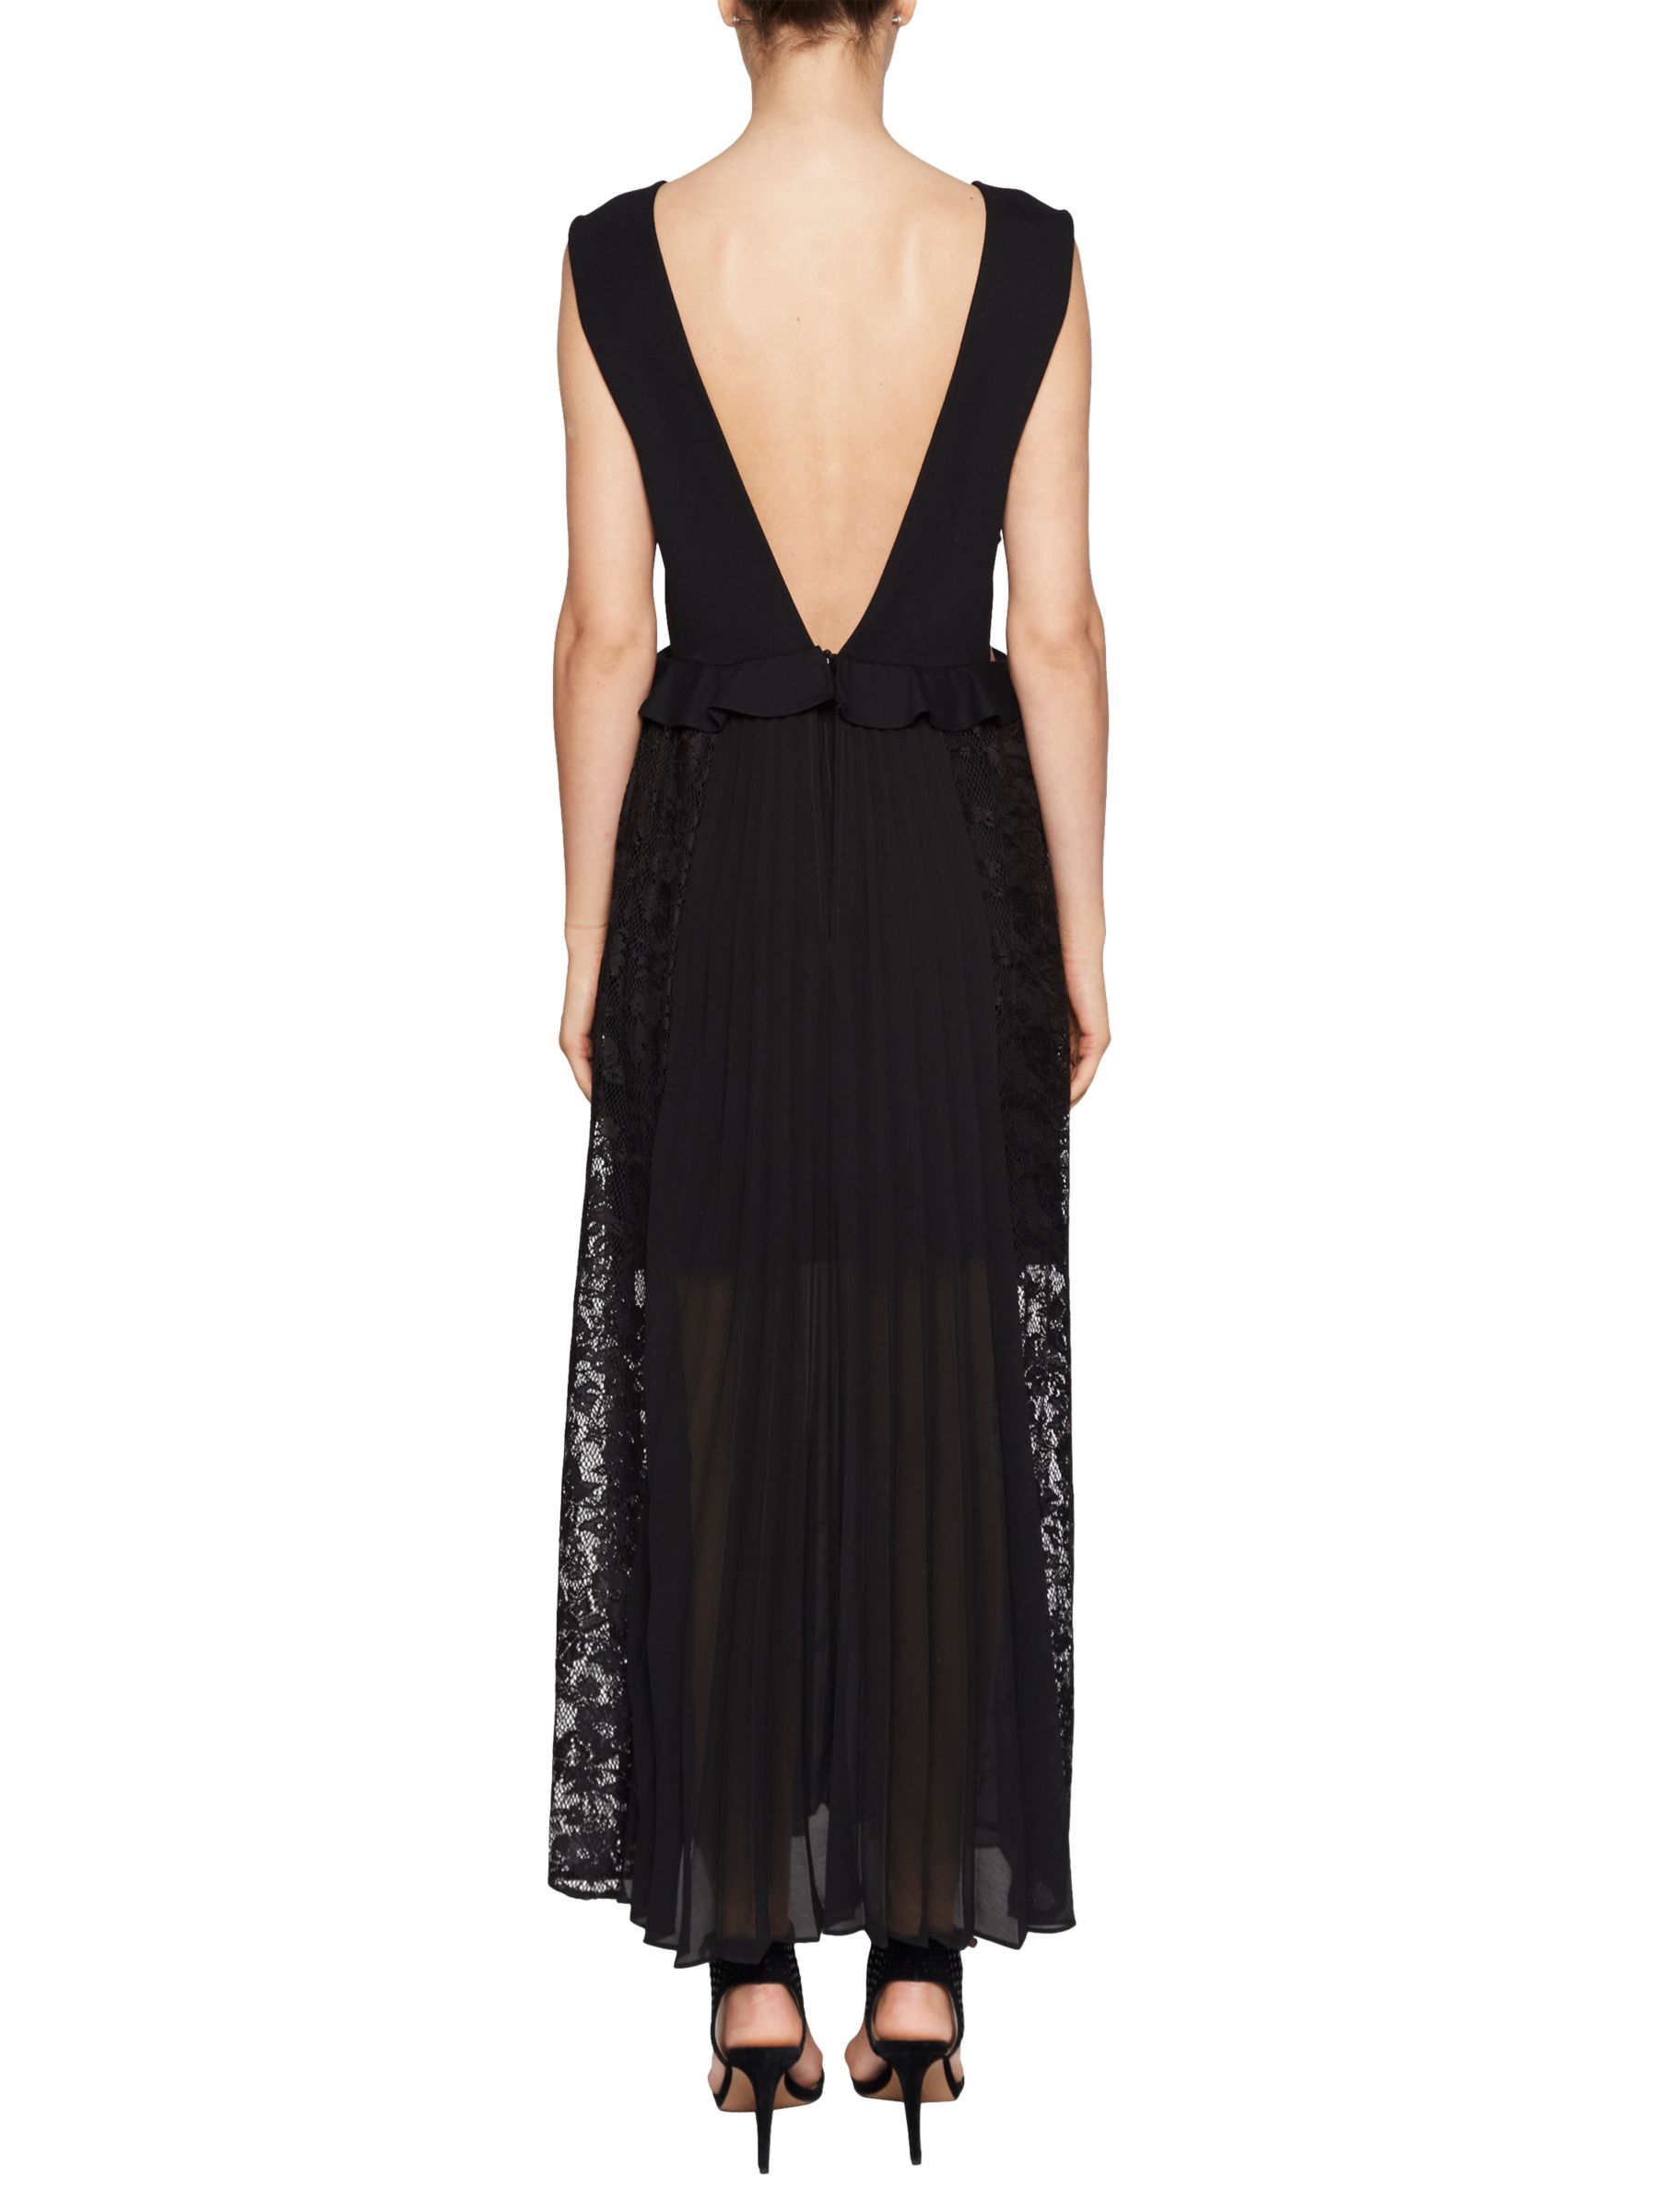 French Connection Angelina Pleated Jersey Dress, Black